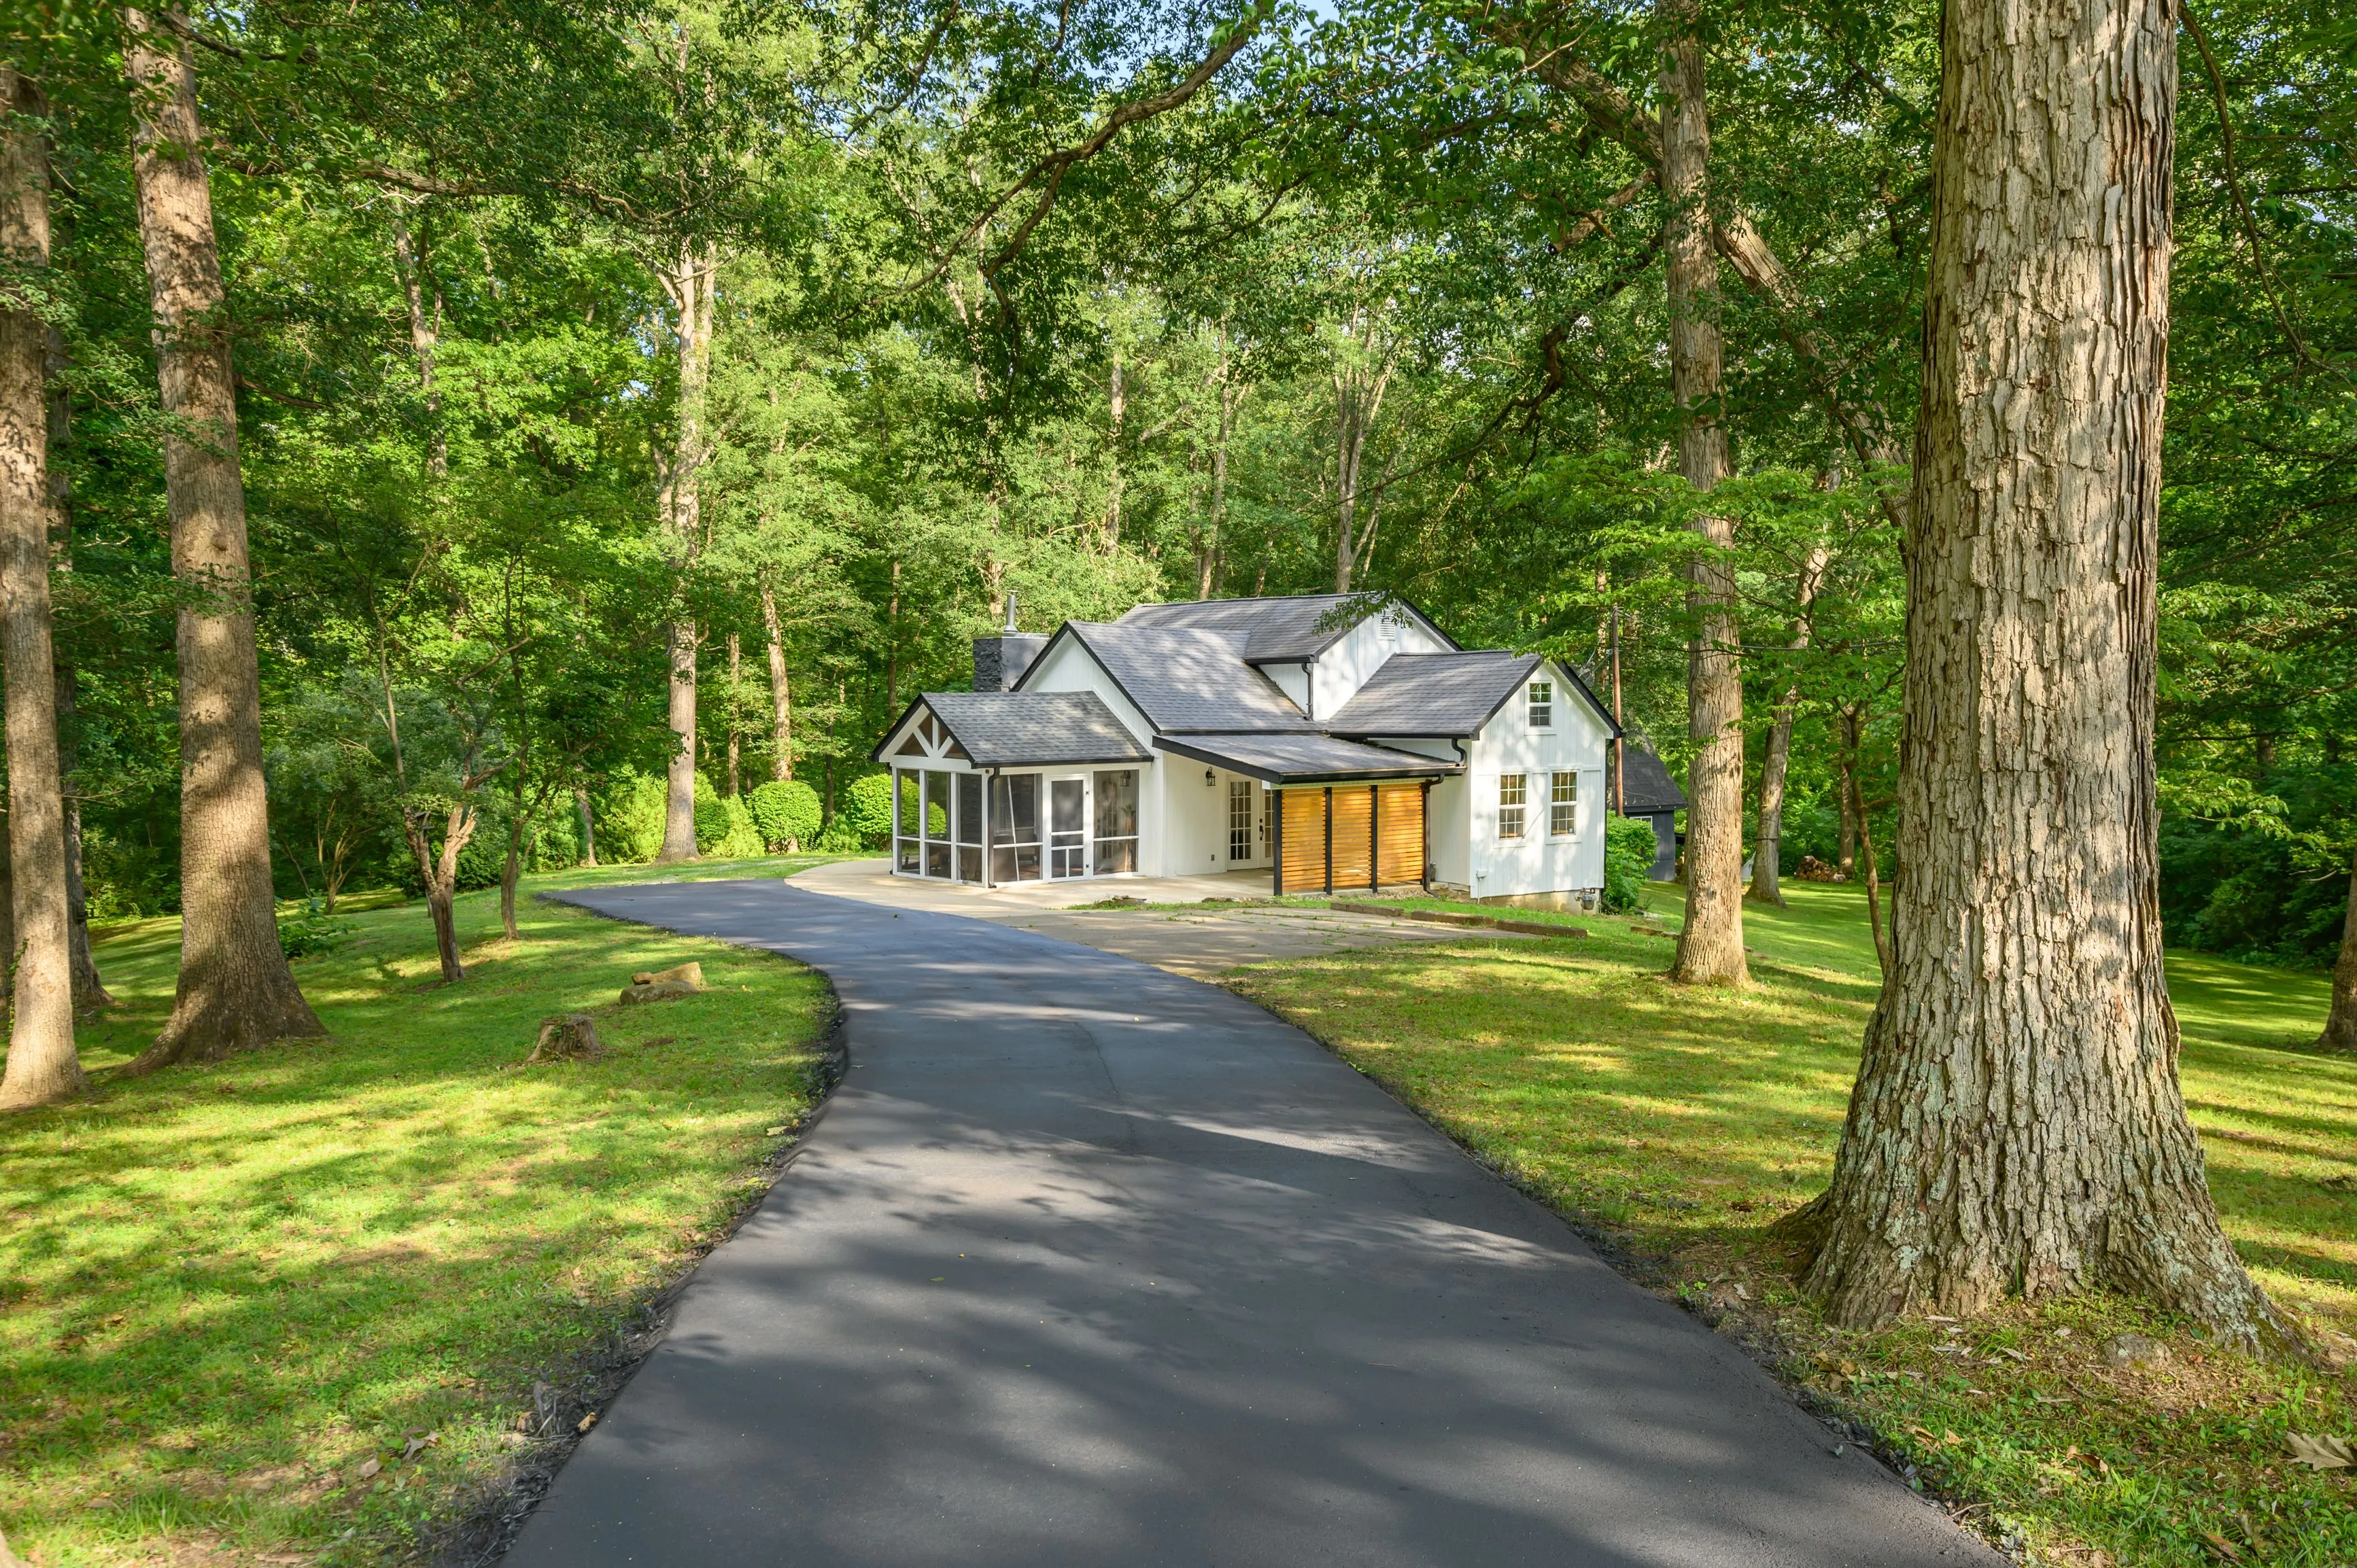 A serene suburban house with a paved driveway, surrounded by lush green trees under a clear sky.